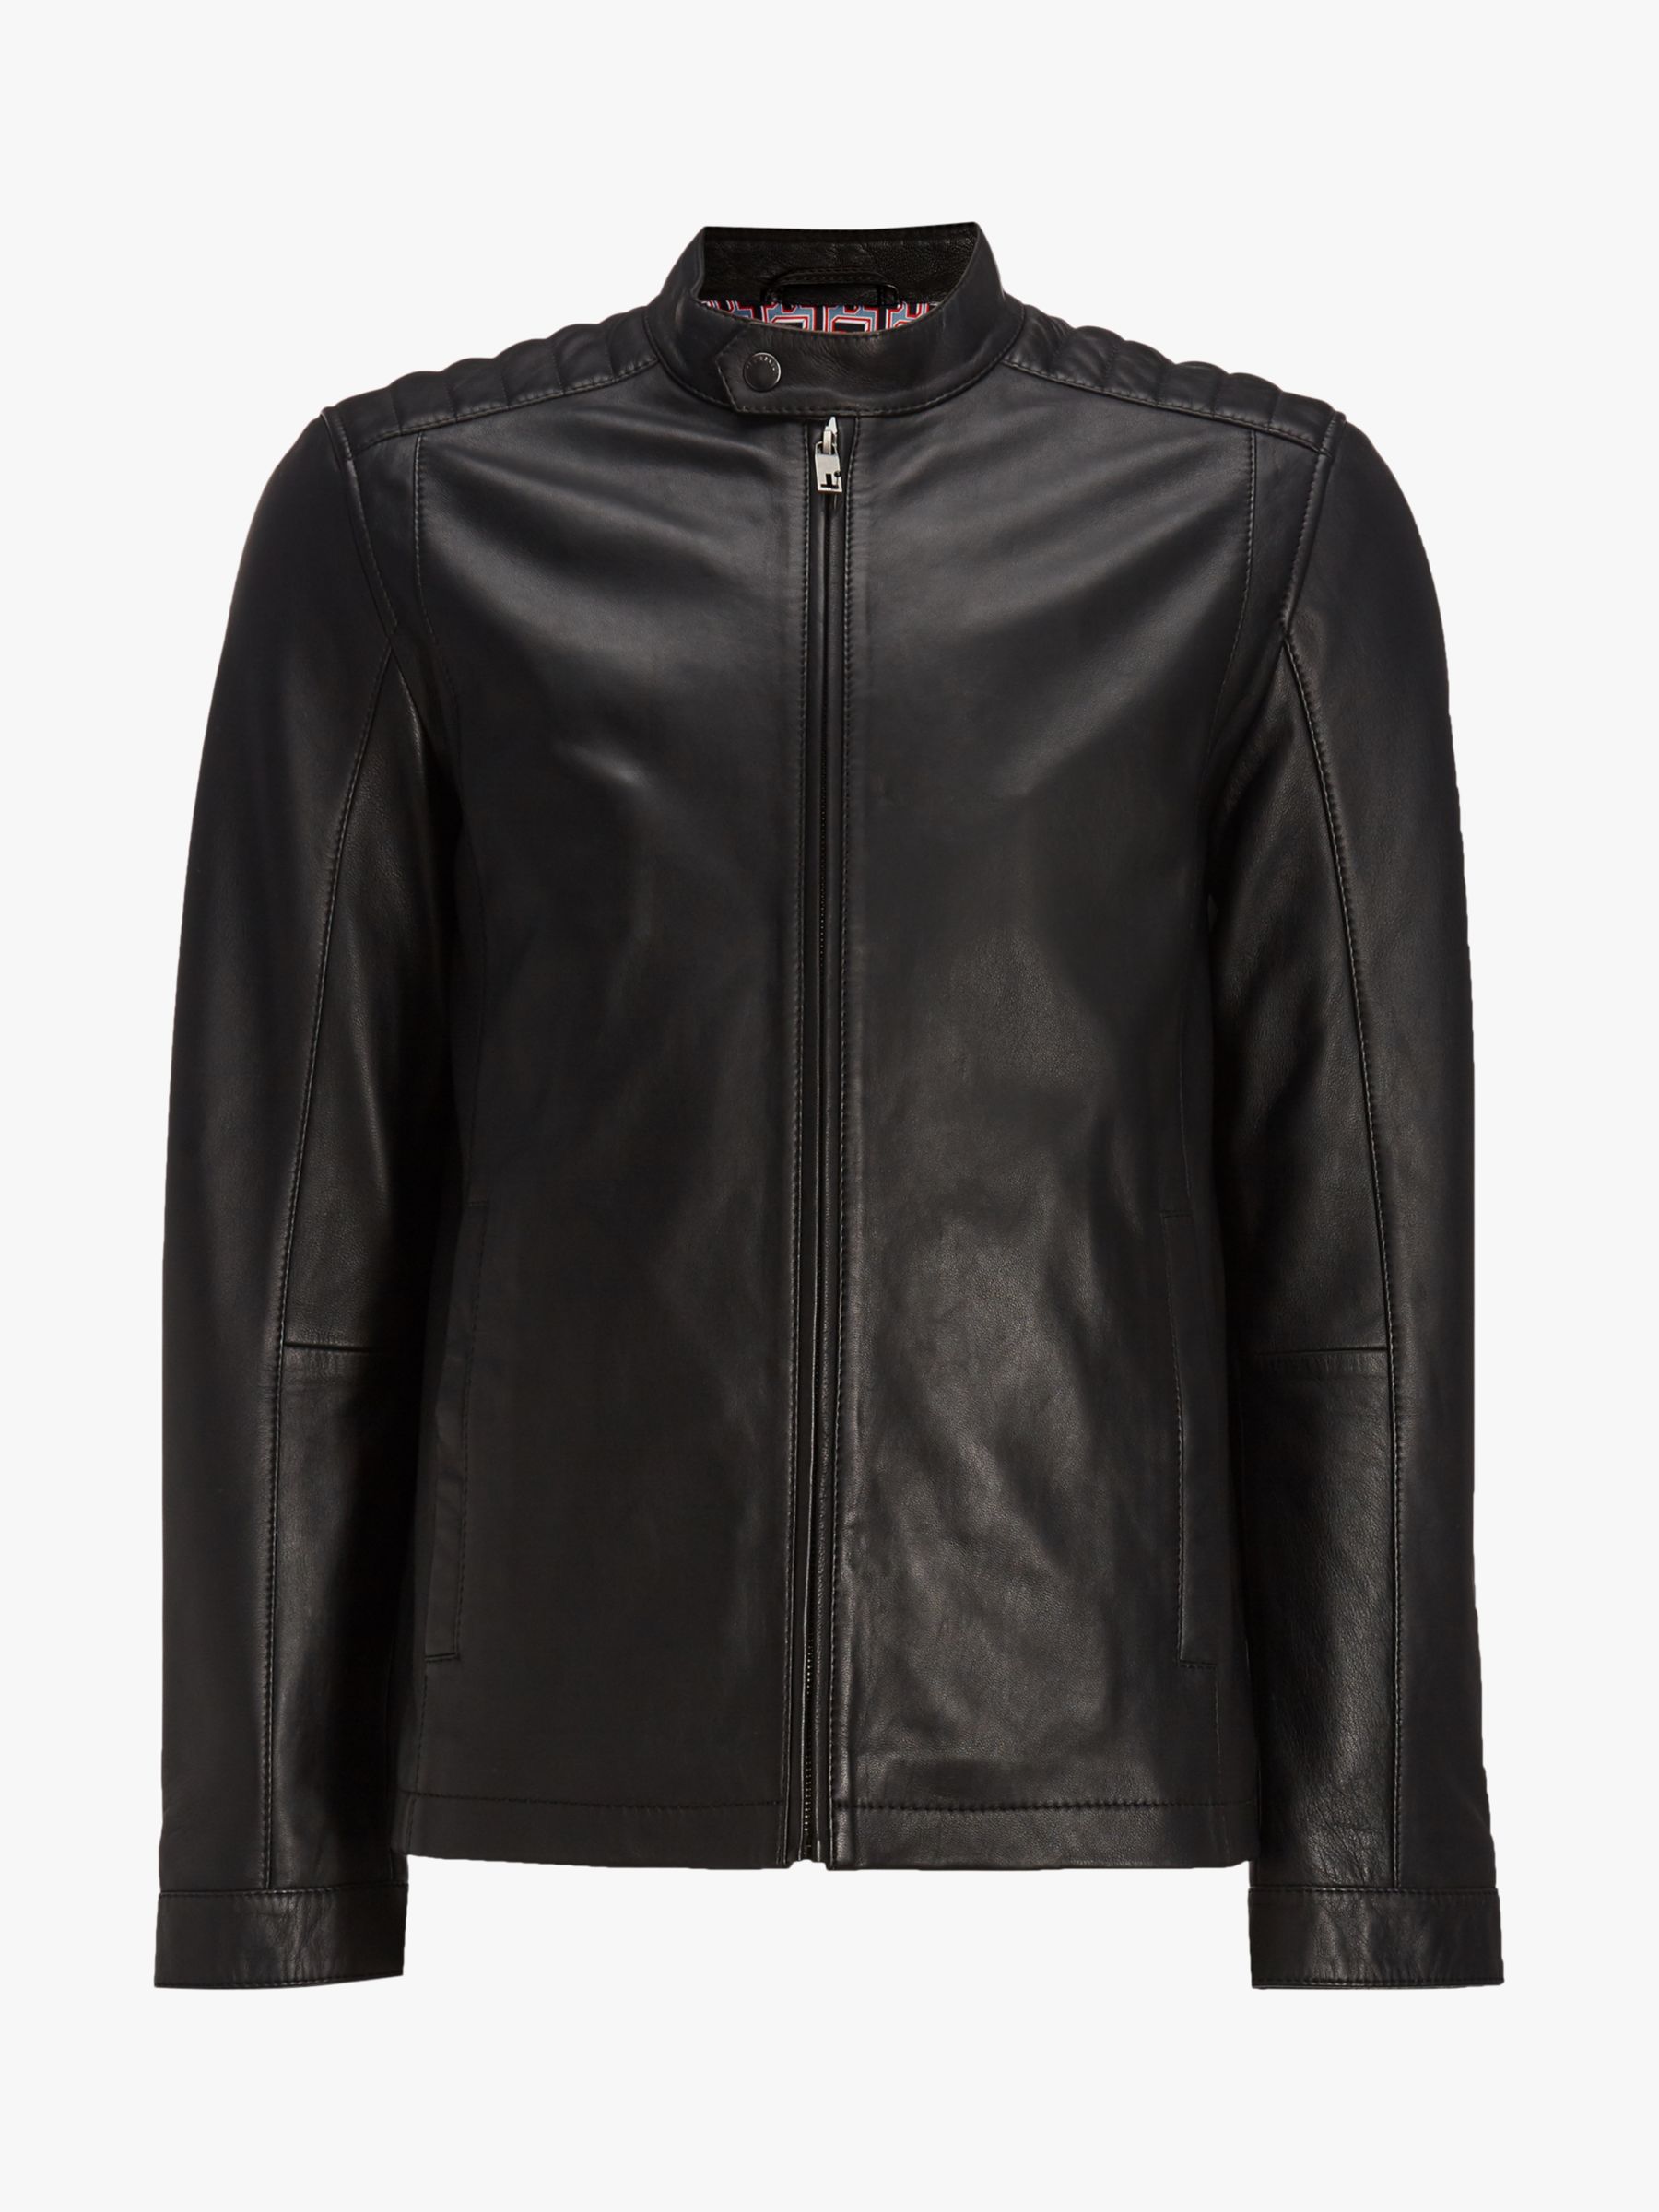 Ted Baker Paypa Leather Jacket, Black at John Lewis & Partners